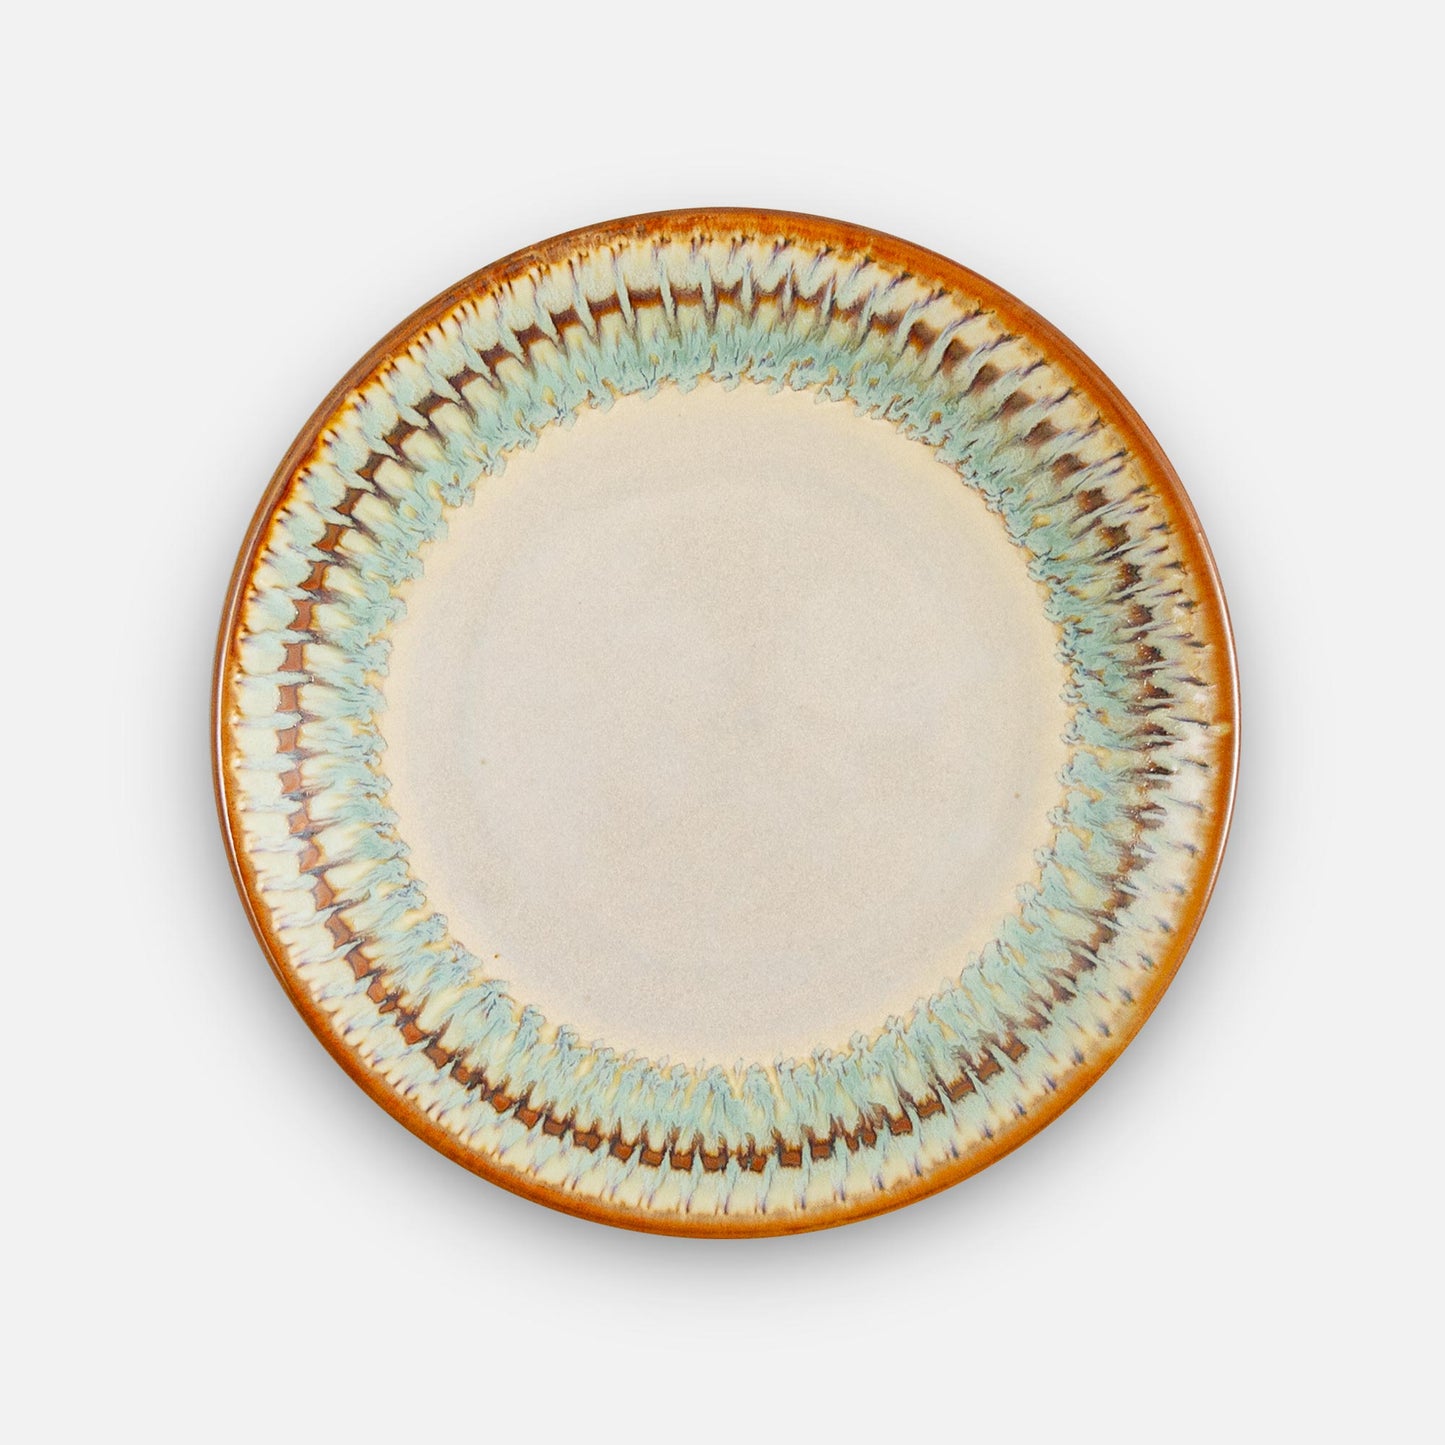 Handmade Pottery Rimless Dinner Plate made by Georgetown Pottery in Maine in Ivory Green Oribe pattern